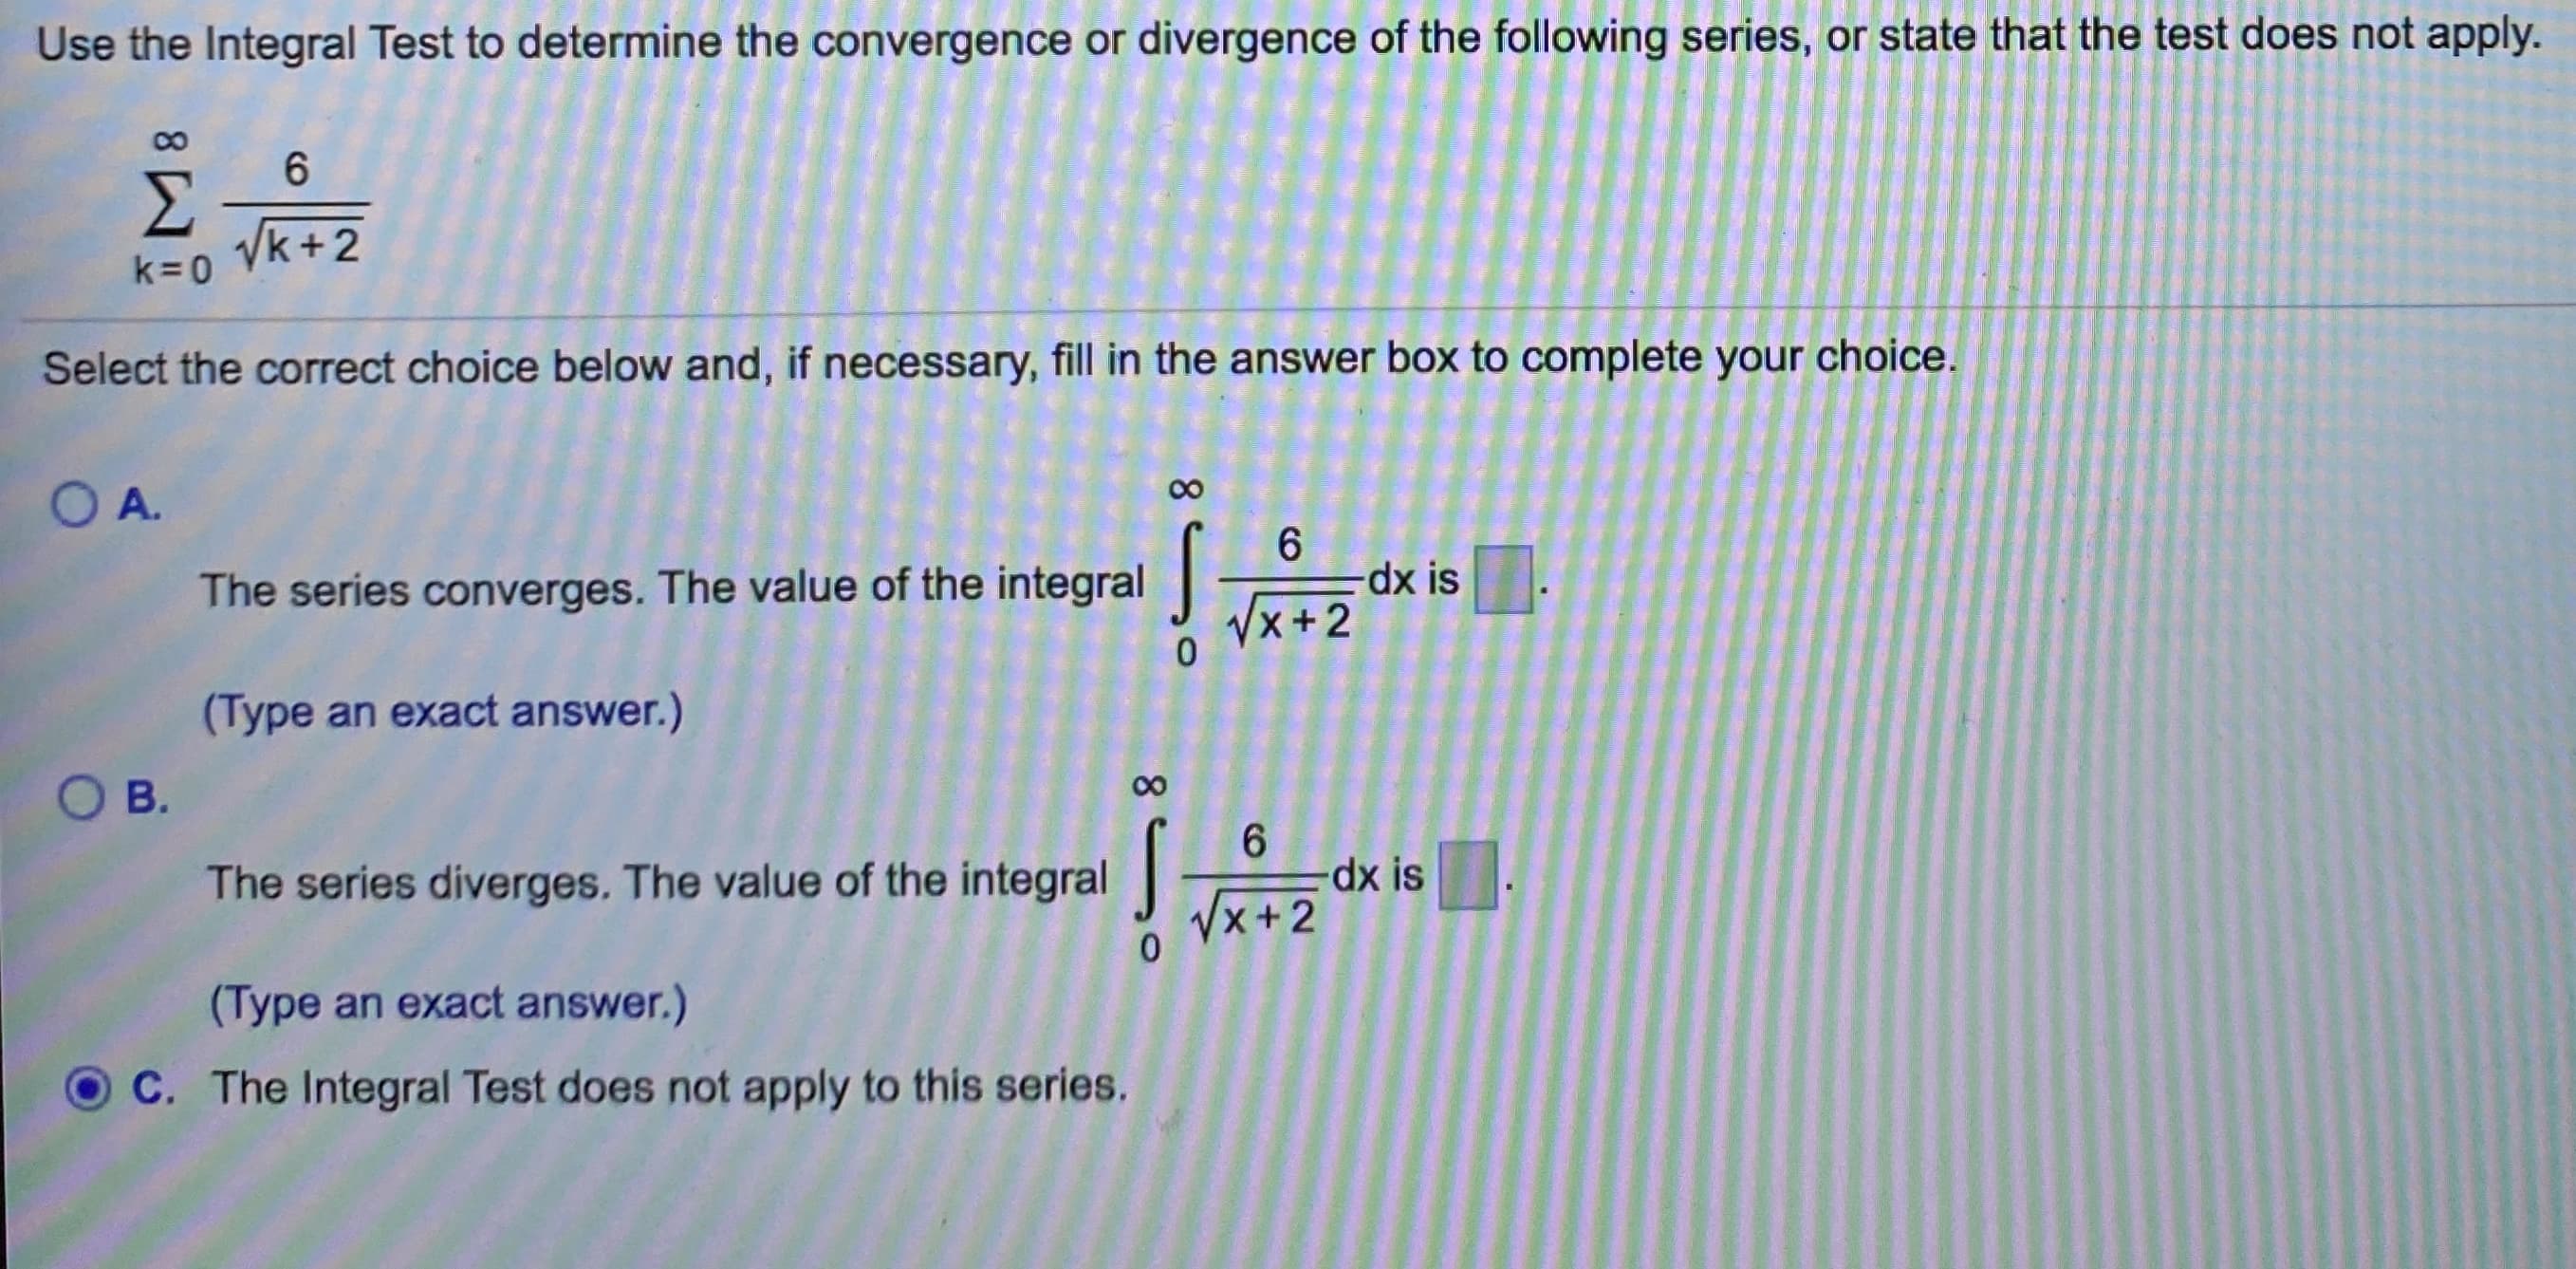 Use the Integral Test to determine the convergence or divergence of the following series, or state that the test does not apply.
6.
Vk+2
k=0
